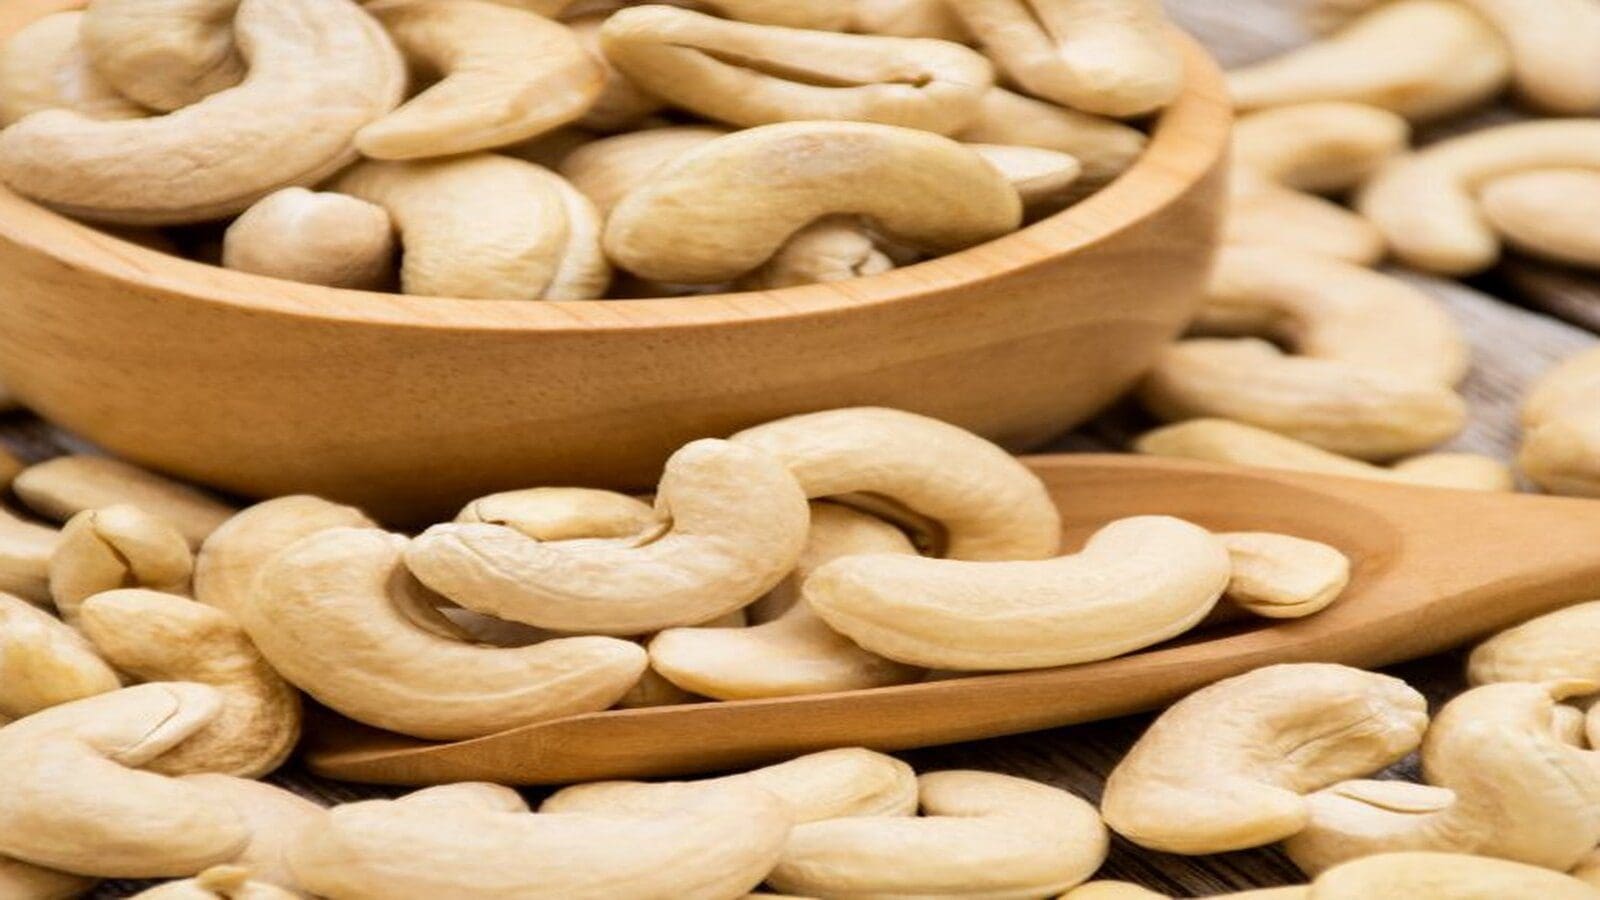 West African Development Bank grants Benin US$16M  to boost the cashew sector